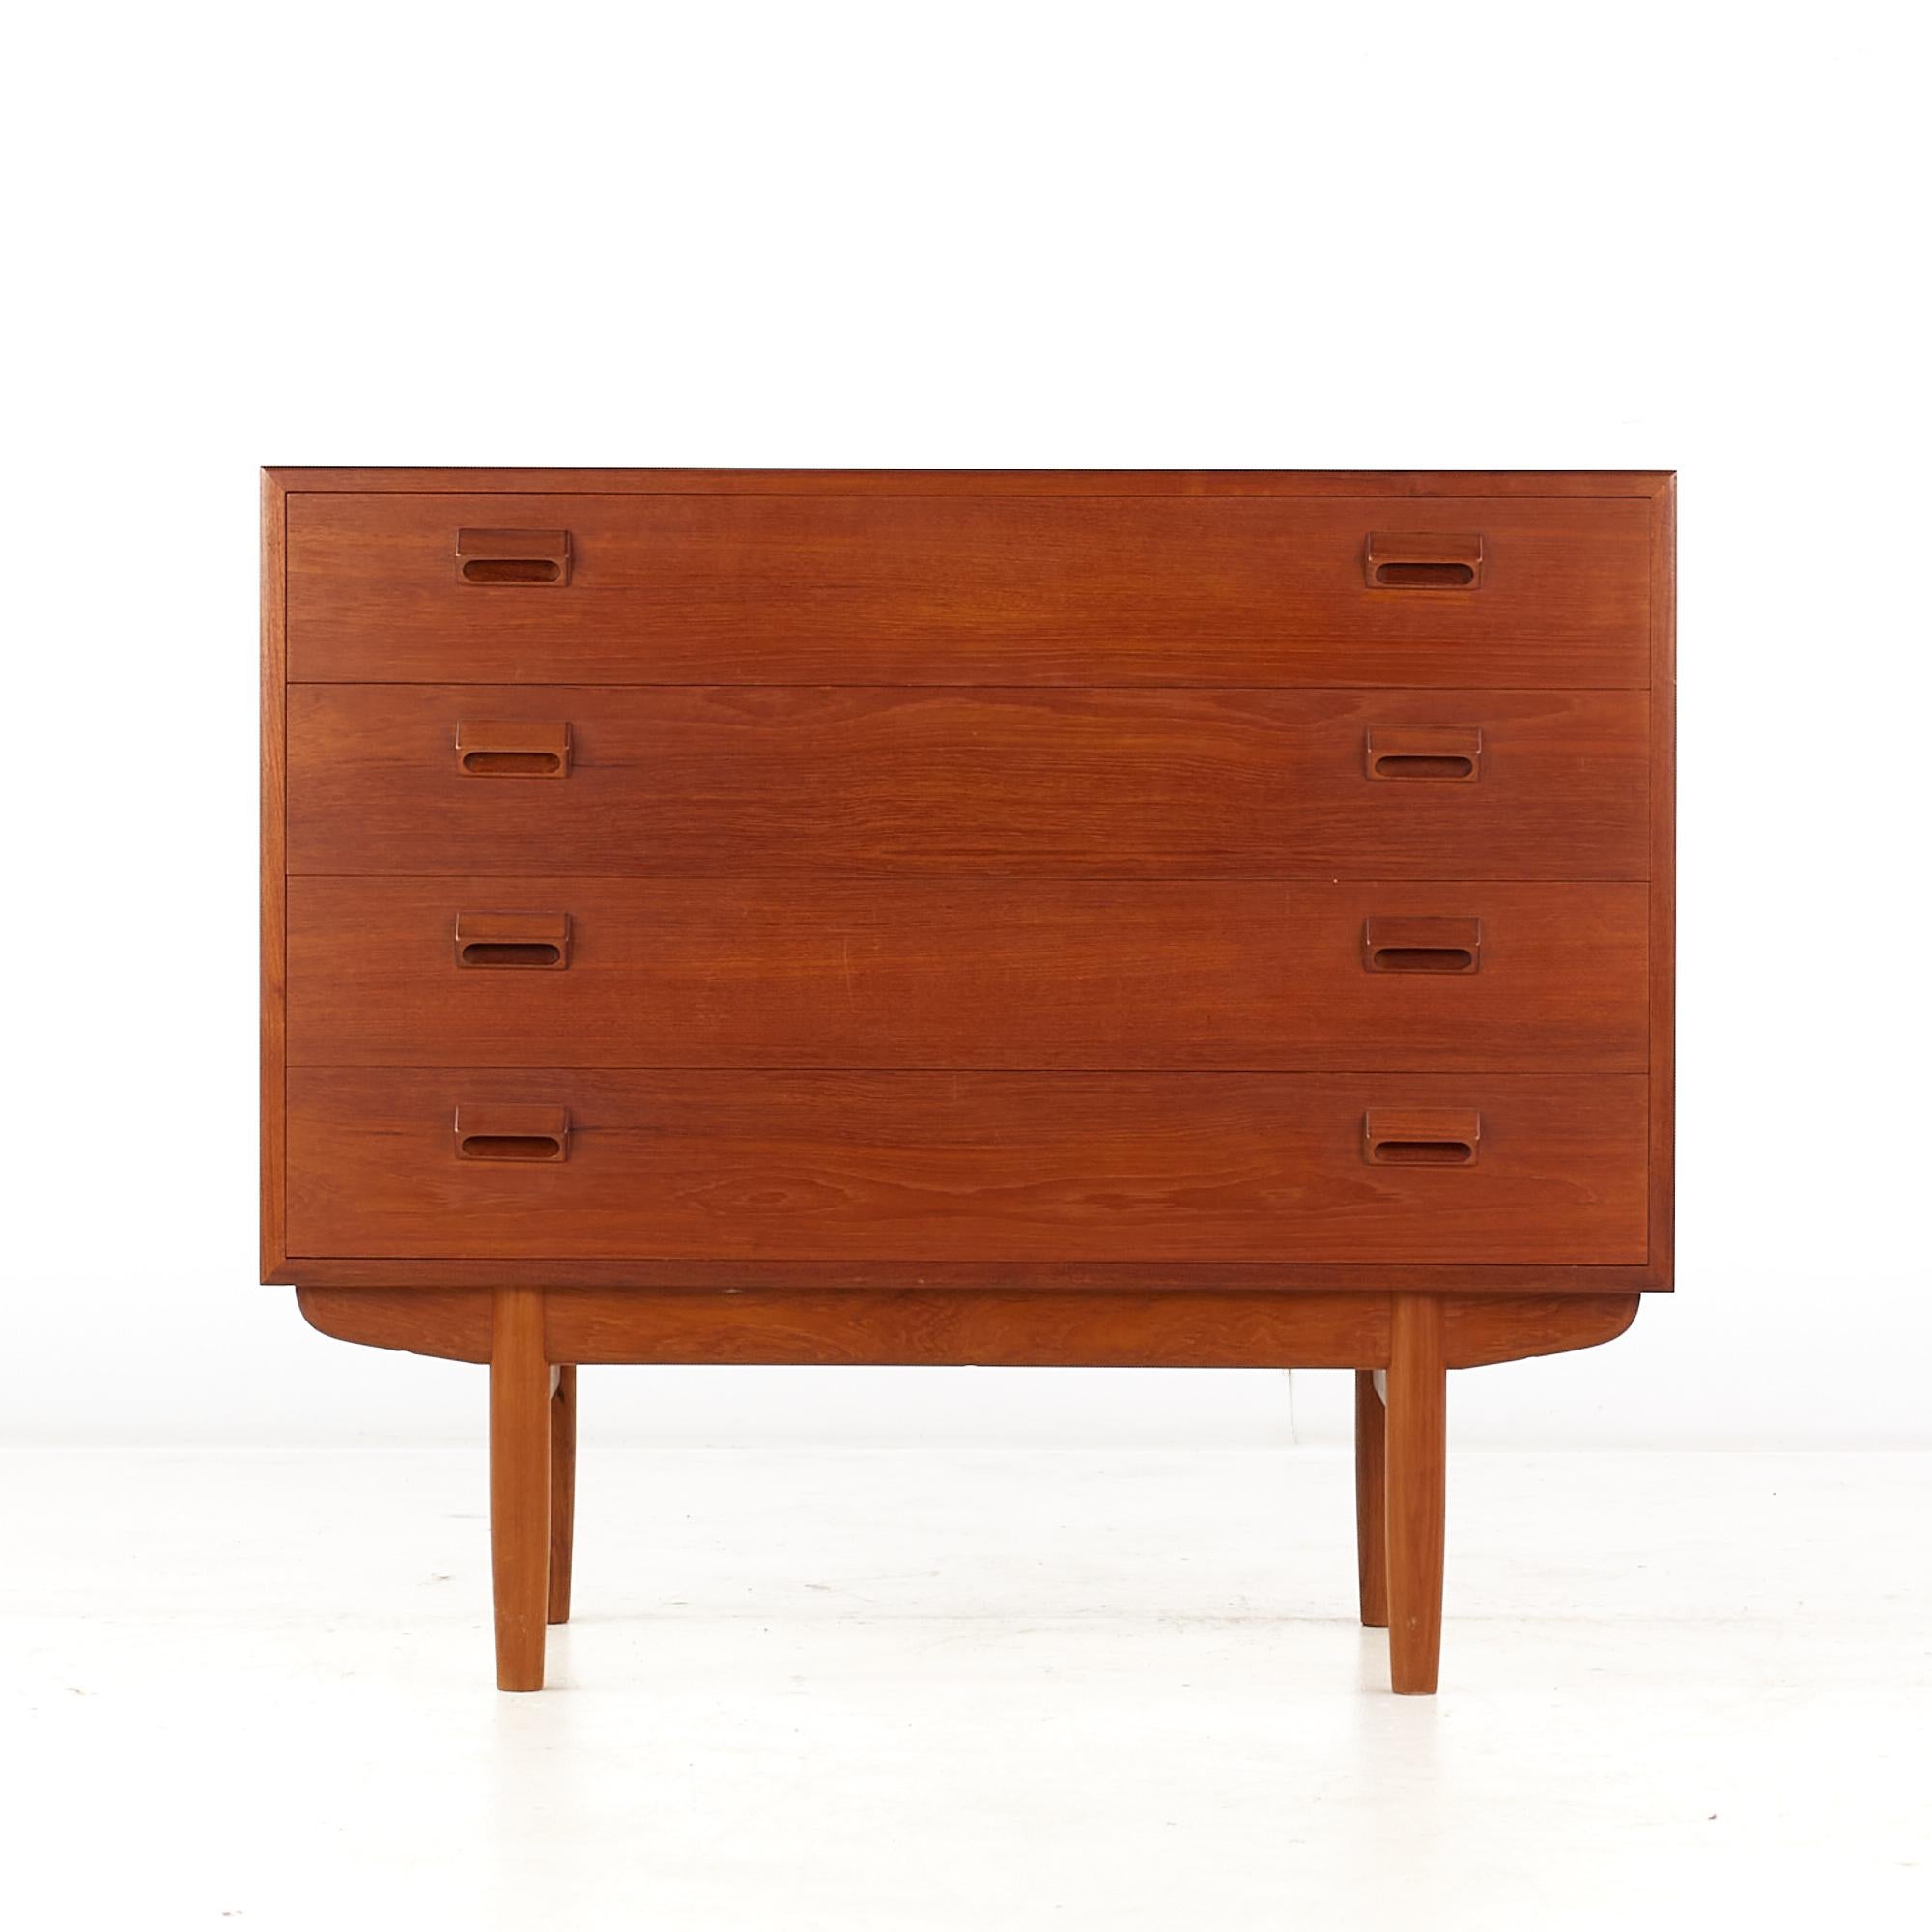 Borge Mogensen for Soborg Mobler Mid Century Danish Teak 4 drawer dresser Chest

This dresser measures: 39.25 wide x 18 deep x 34.25 inches high

All pieces of furniture can be had in what we call restored vintage condition. That means the piece